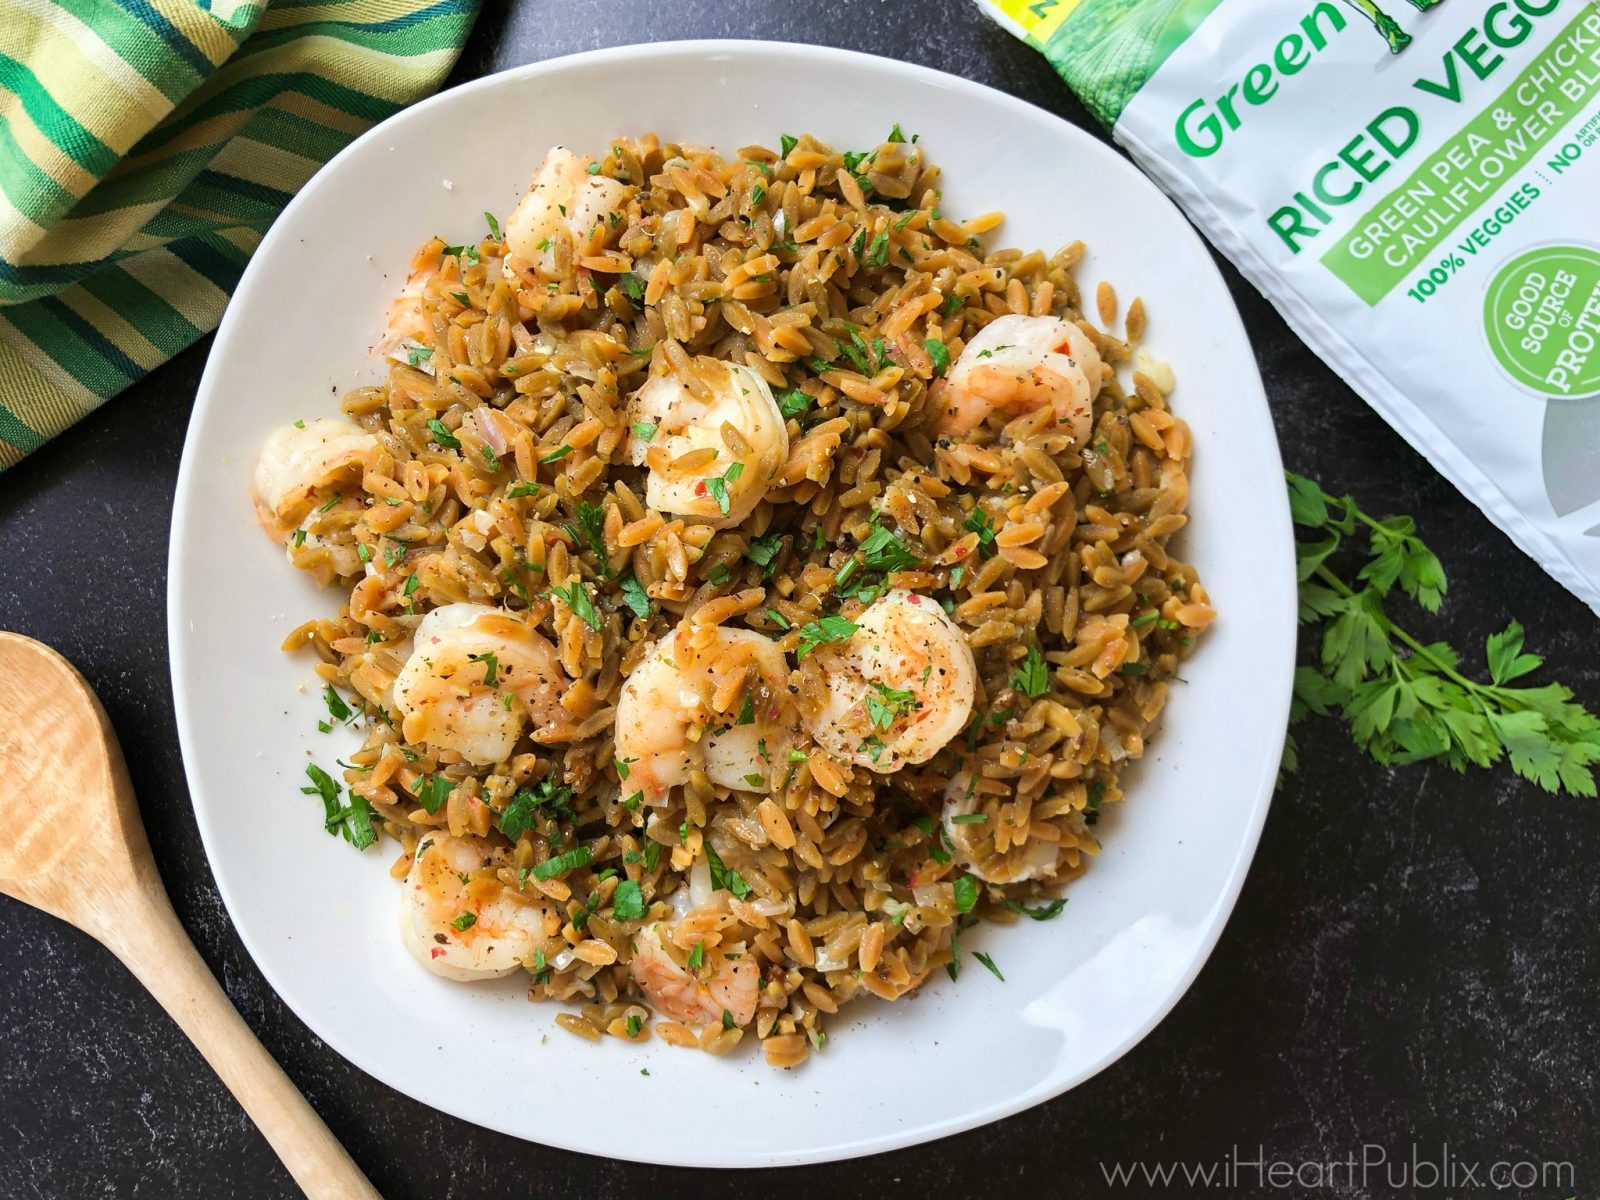 Shrimp Riced Veggies "Risotto" Recipe - Save Now On Green Giant Riced Veggies on I Heart Publix